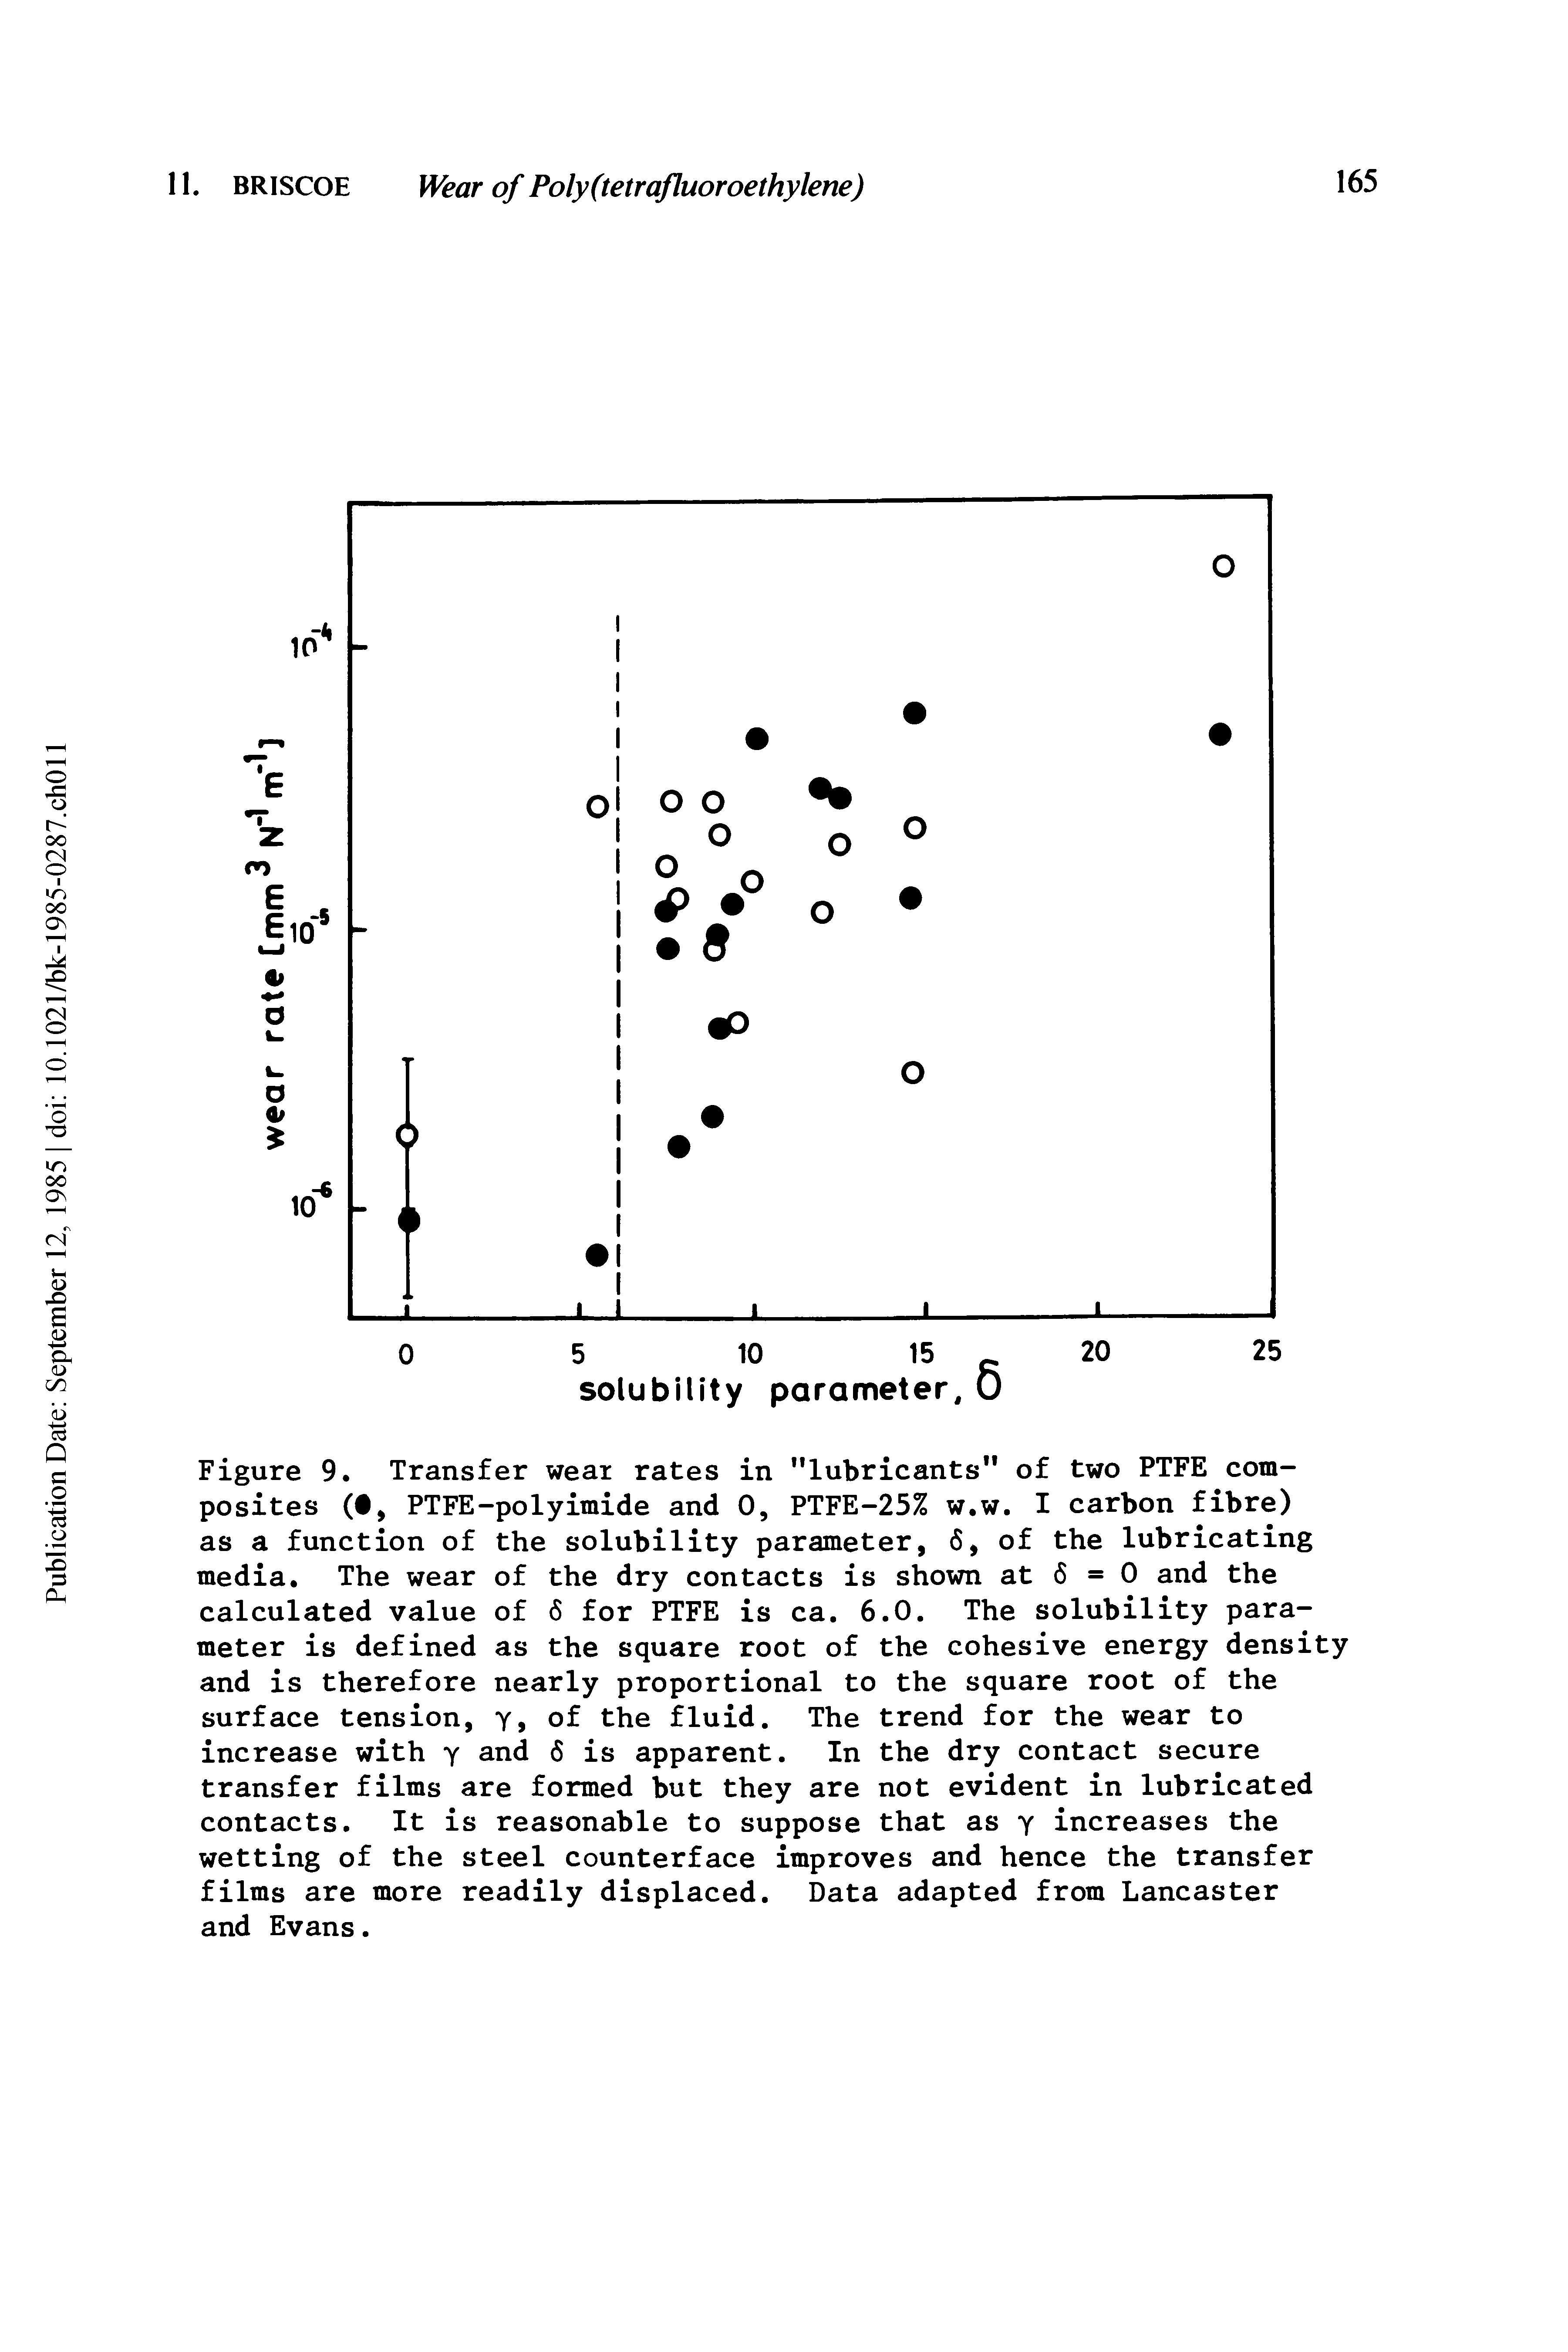 Figure 9. Transfer wear rates in "lubricants" of two PTFE composites (, PTFE-polyimide and 0, PTFE-25% w.w. I carbon fibre) as a function of the solubility parameter, 6, of the lubricating media. The wear of the dry contacts is shown at 6 = 0 and the calculated value of 6 for PTFE is ca. 6.0. The solubility parameter is defined as the square root of the cohesive energy density and is therefore nearly proportional to the square root of the surface tension, of the fluid. The trend for the wear to increase with y and 6 is apparent. In the dry contact secure transfer films are formed but they are not evident in lubricated contacts. It is reasonable to suppose that as y increases the wetting of the steel counterface improves and hence the transfer films are more readily displaced. Data adapted from Lancaster and Evans.